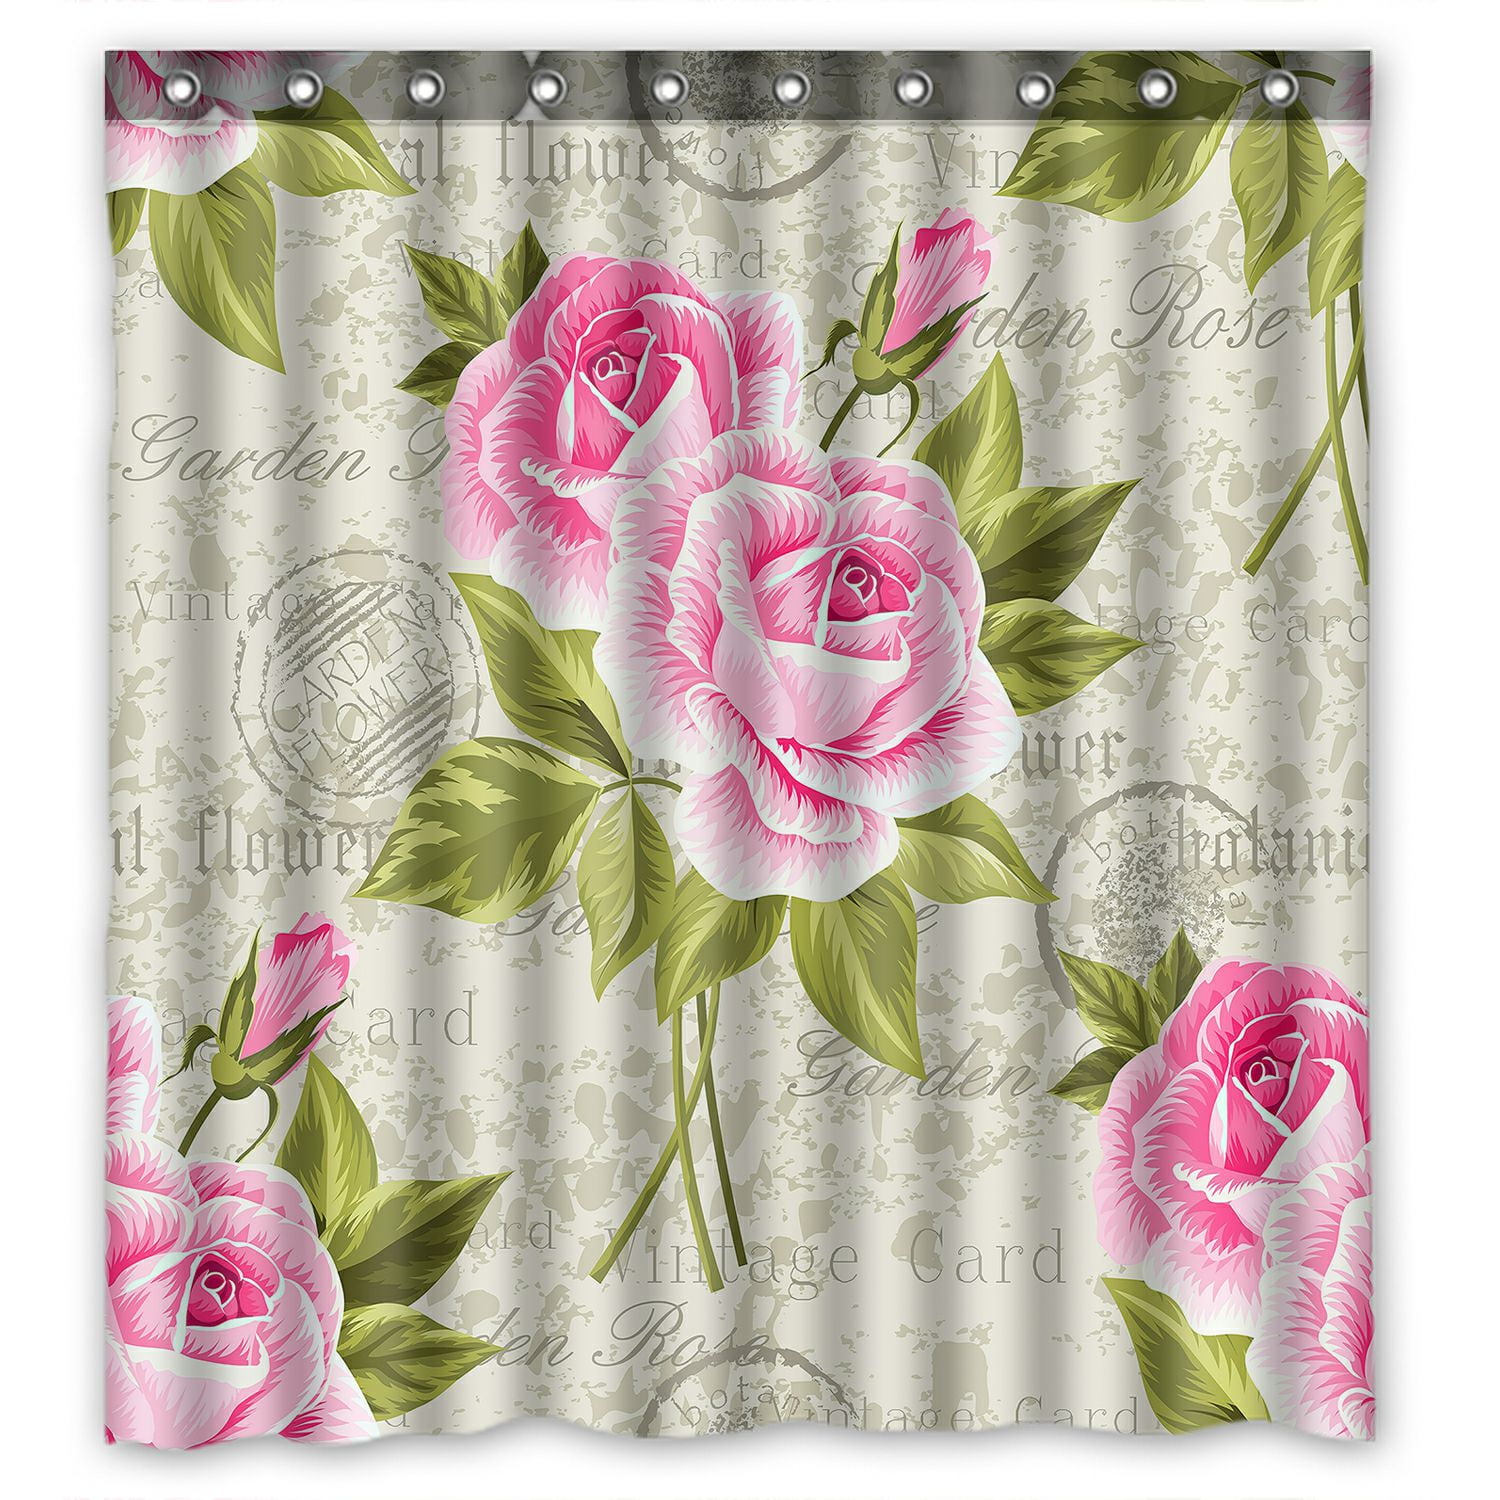 Pink Floral Shower Curtain and Window Curtain Waterproof Fabric Colorful Chic Pink Rose Flower Bathroom Polyester Shower Curtain with 12 Holes for Bathtub Showers,72x72 inches